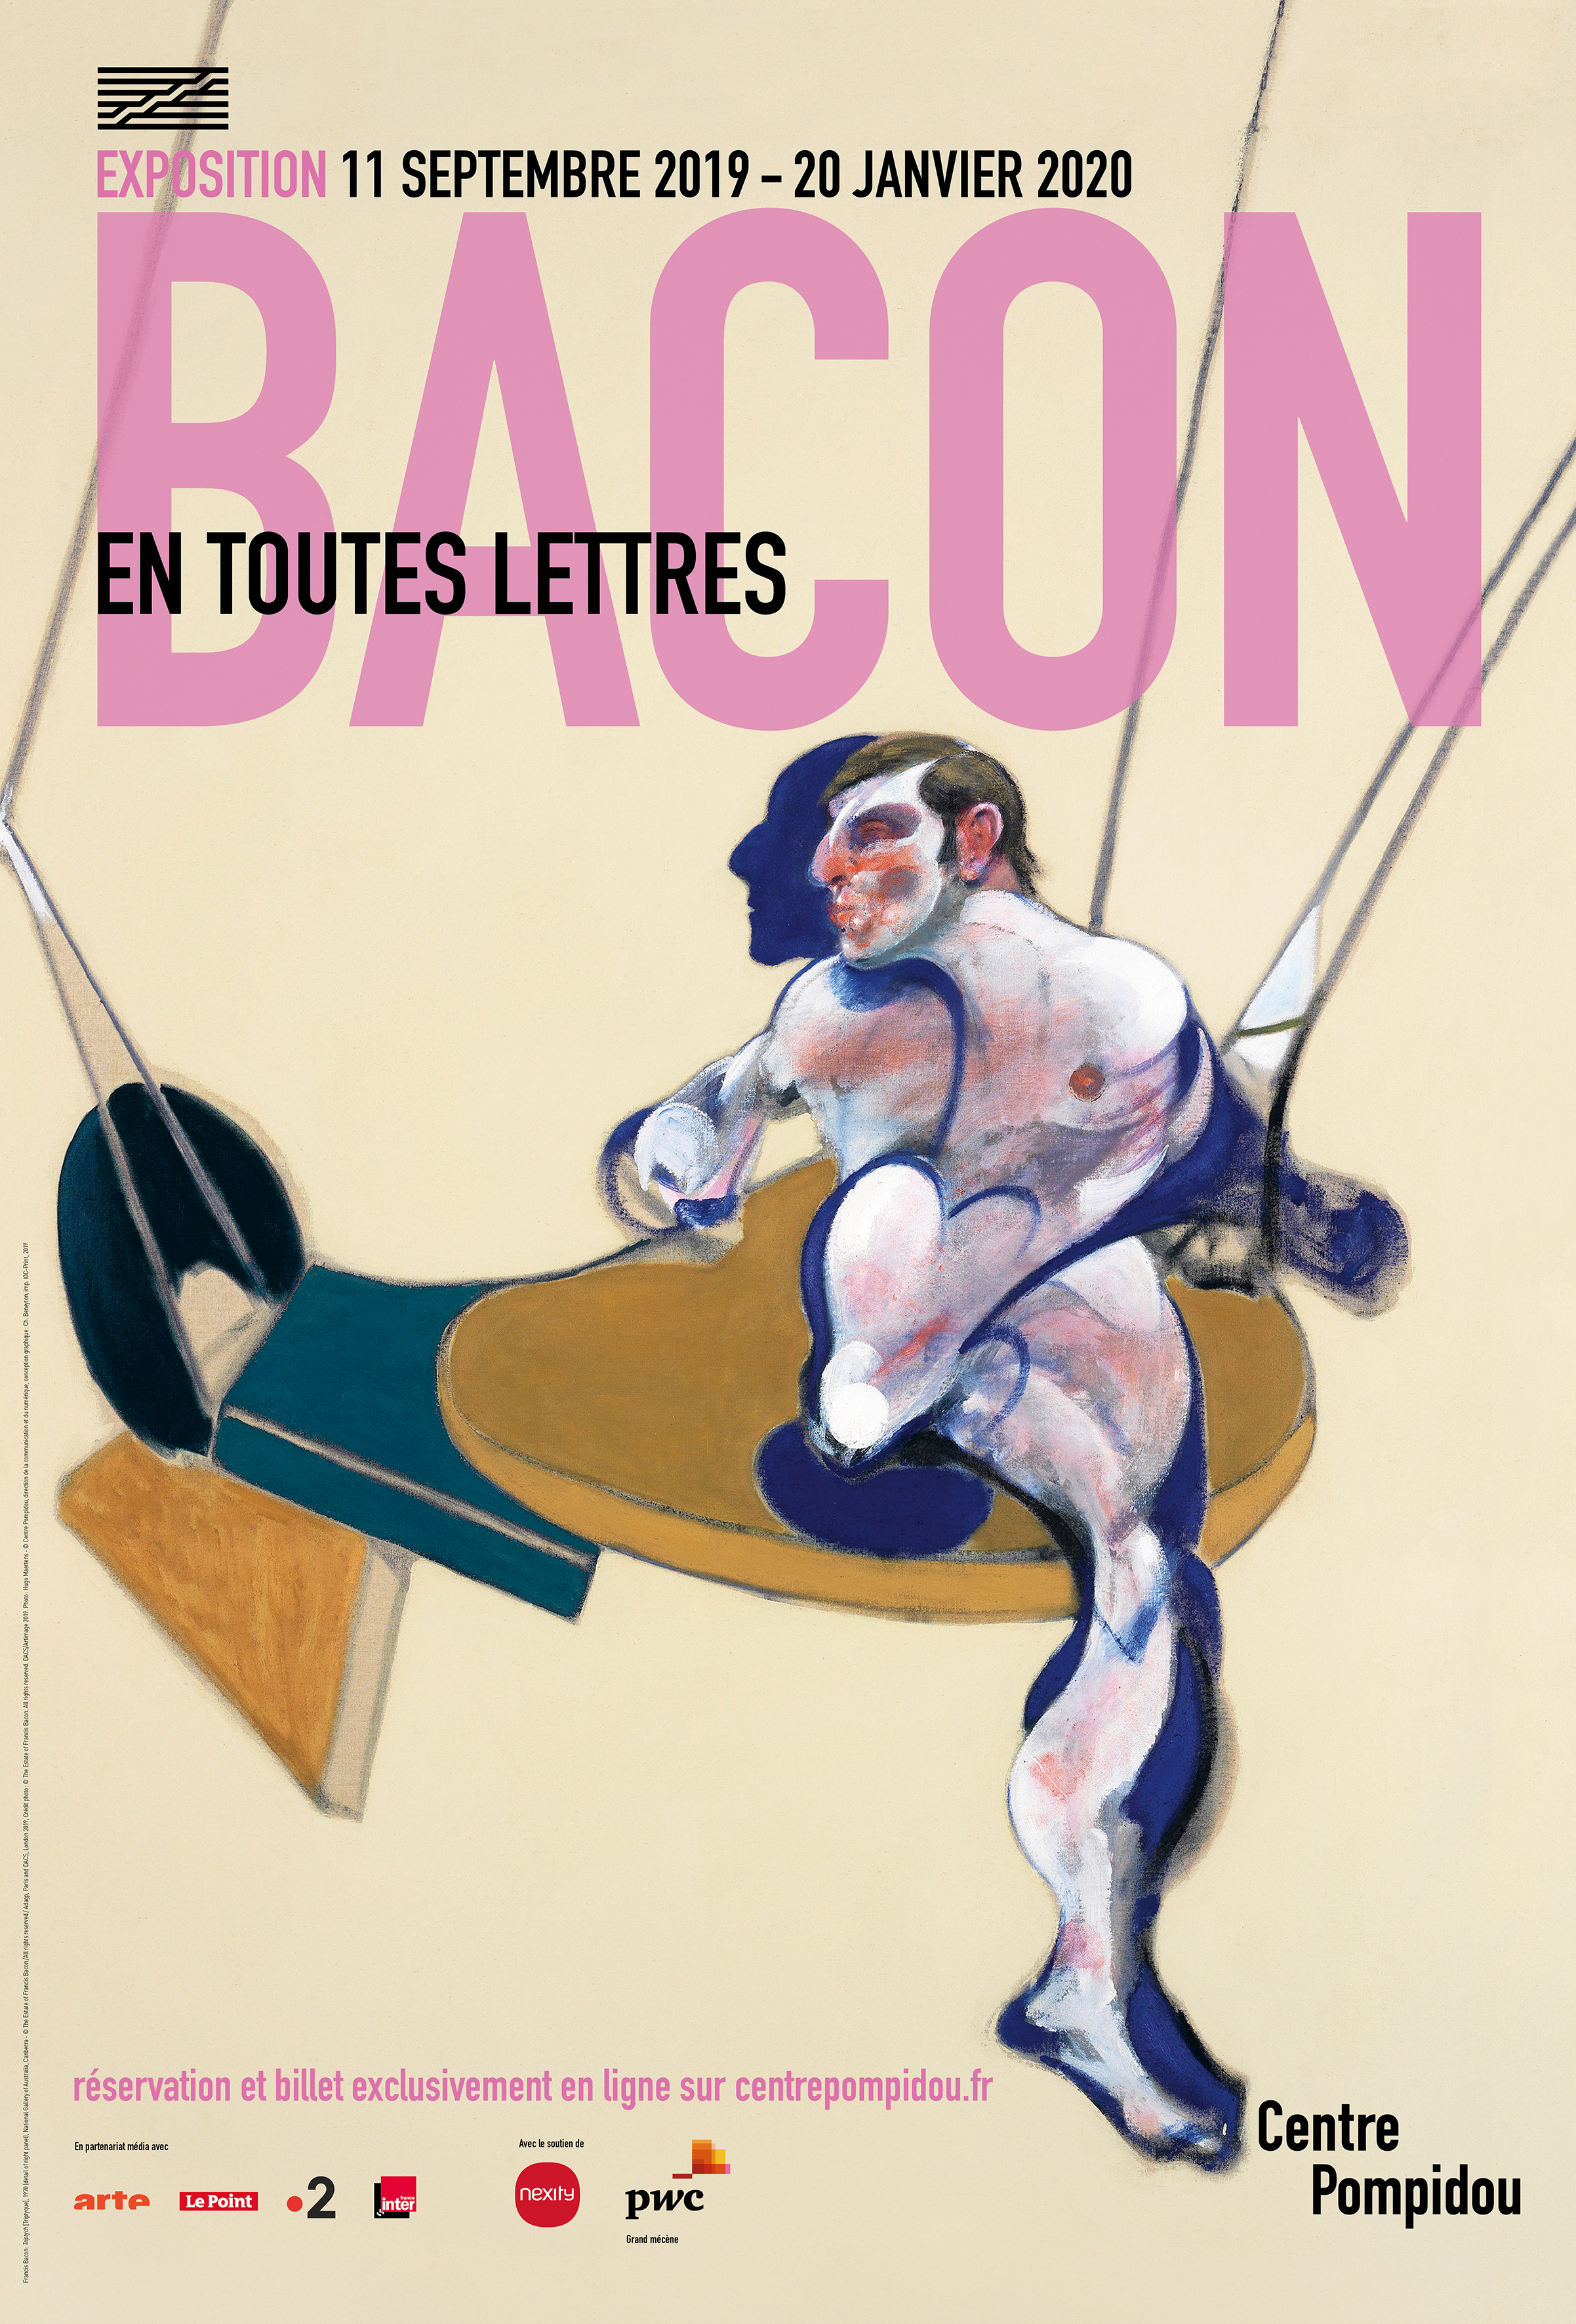 The Francis Bacon MB Art Foundation supports a major Bacon exhibition at the Centre Pompidou in Paris